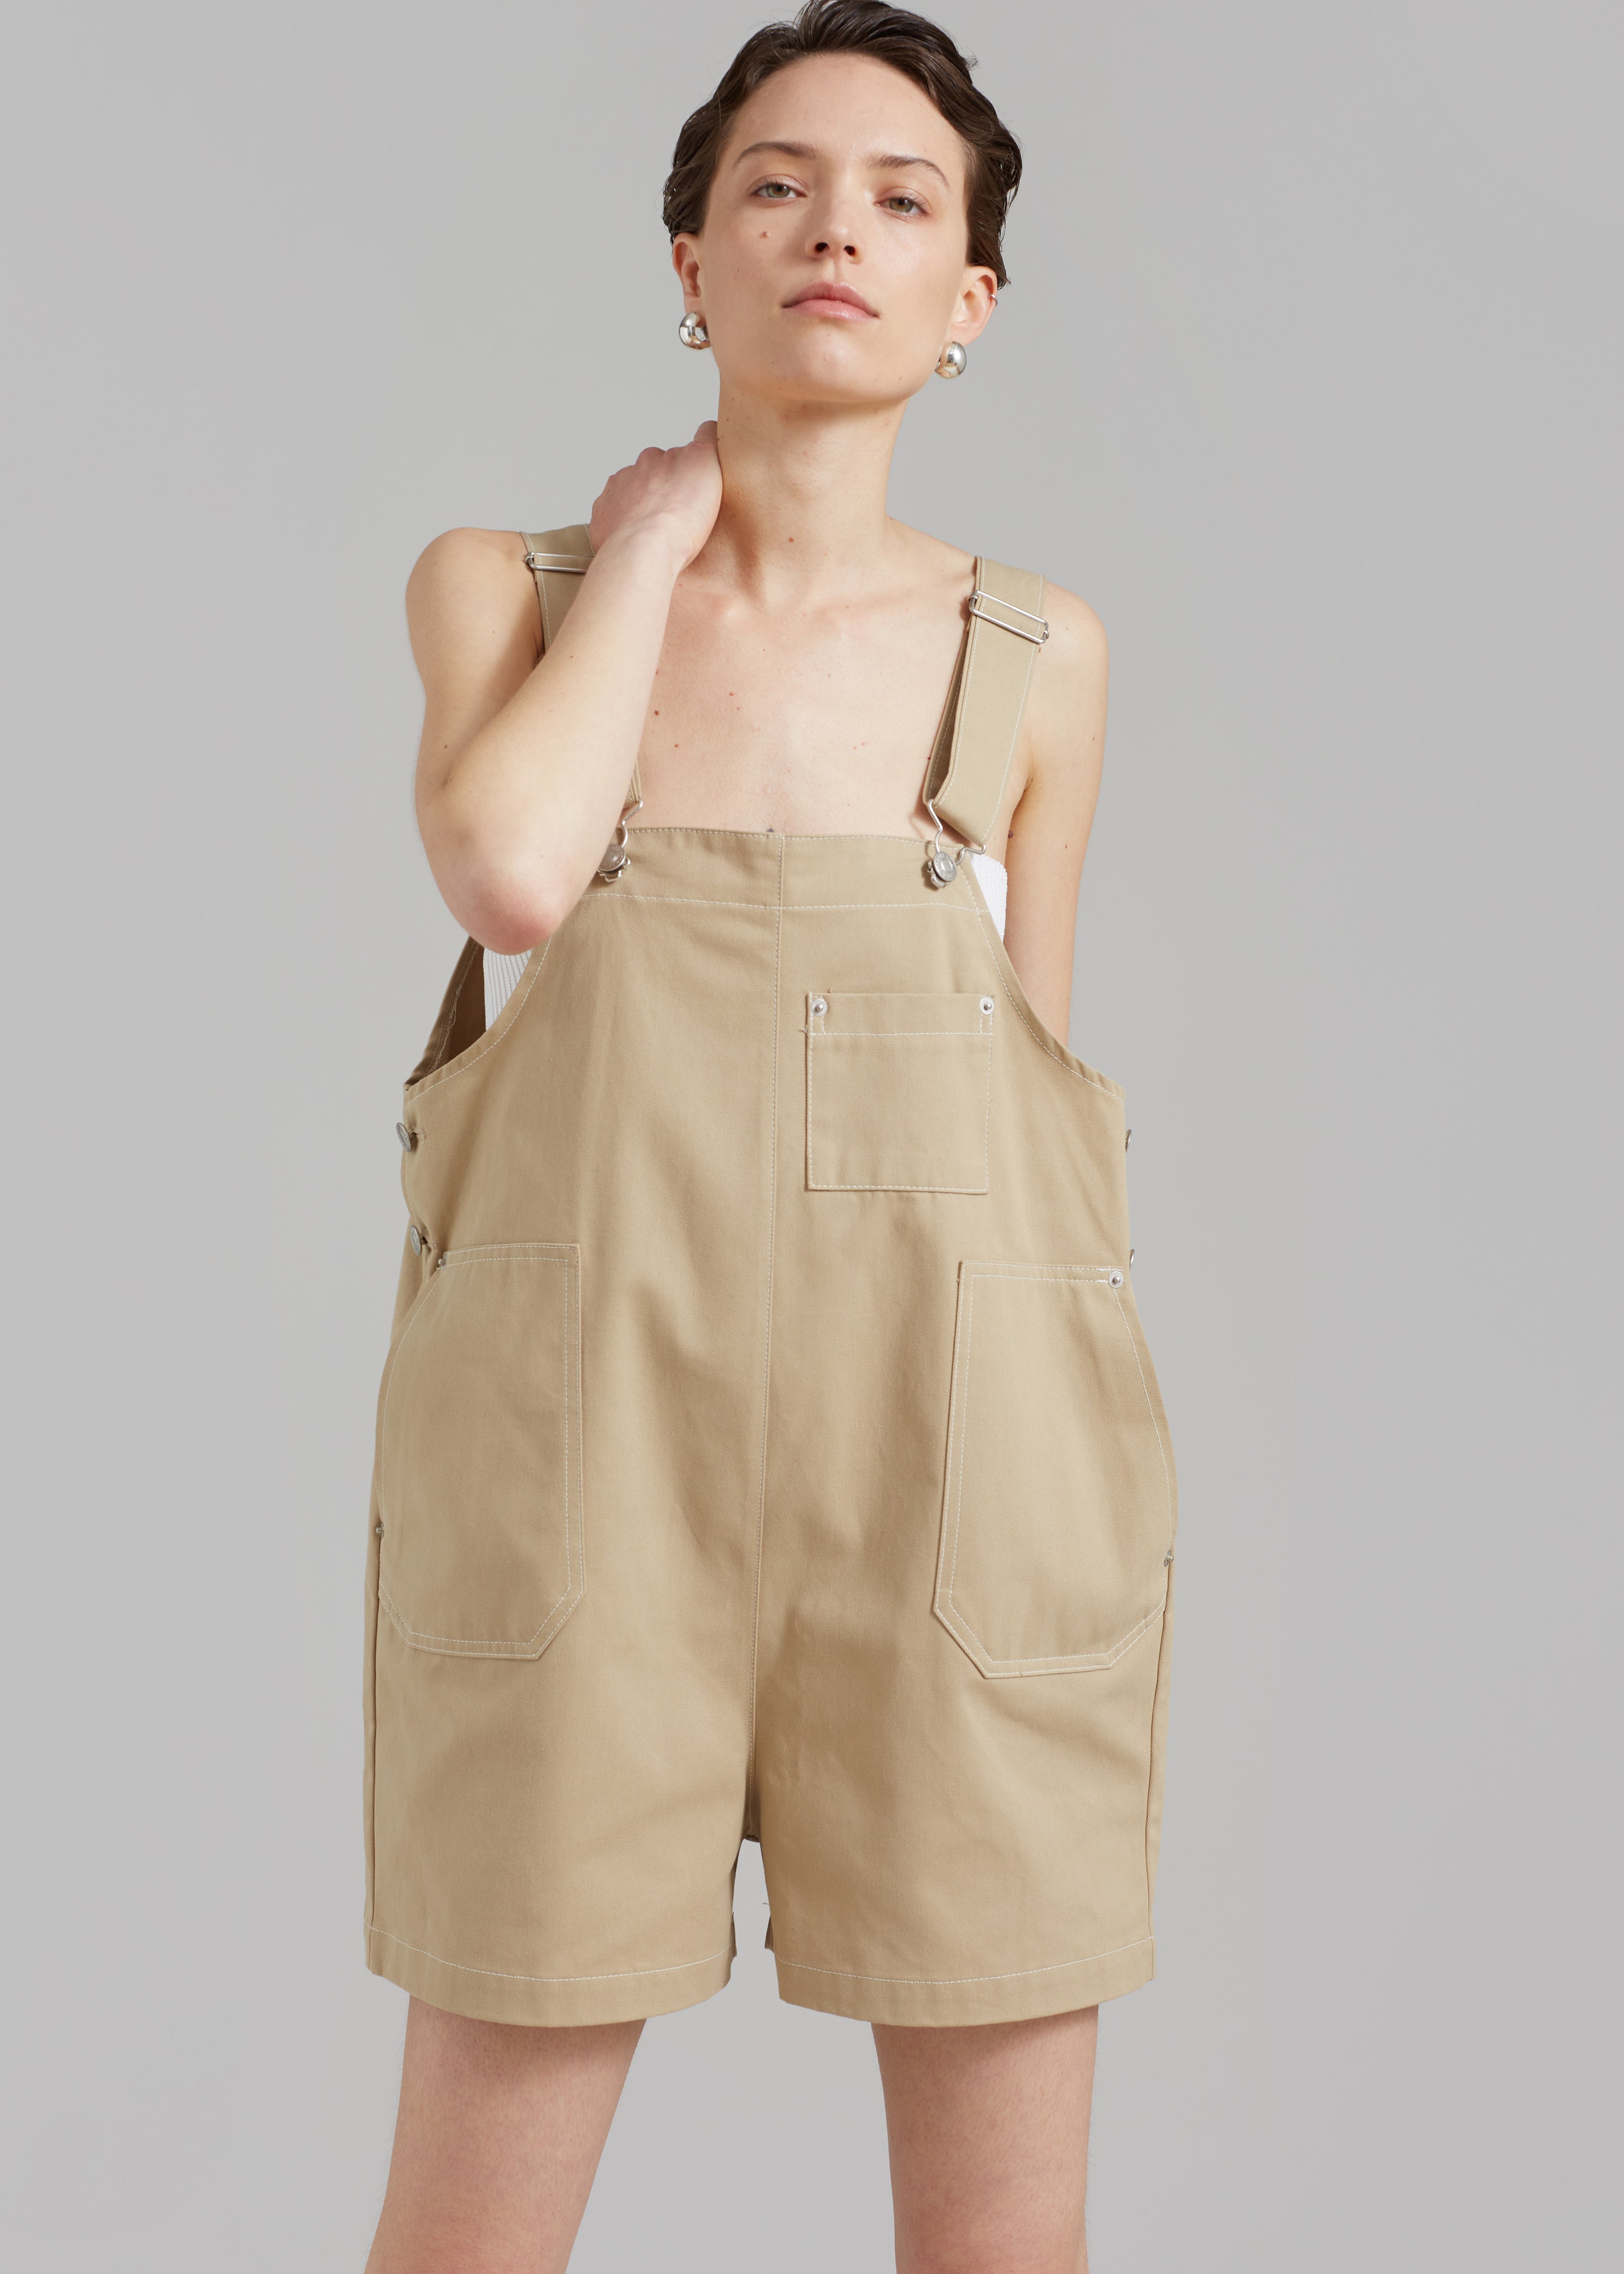 Keeley Overall Shorts - Beige - 4